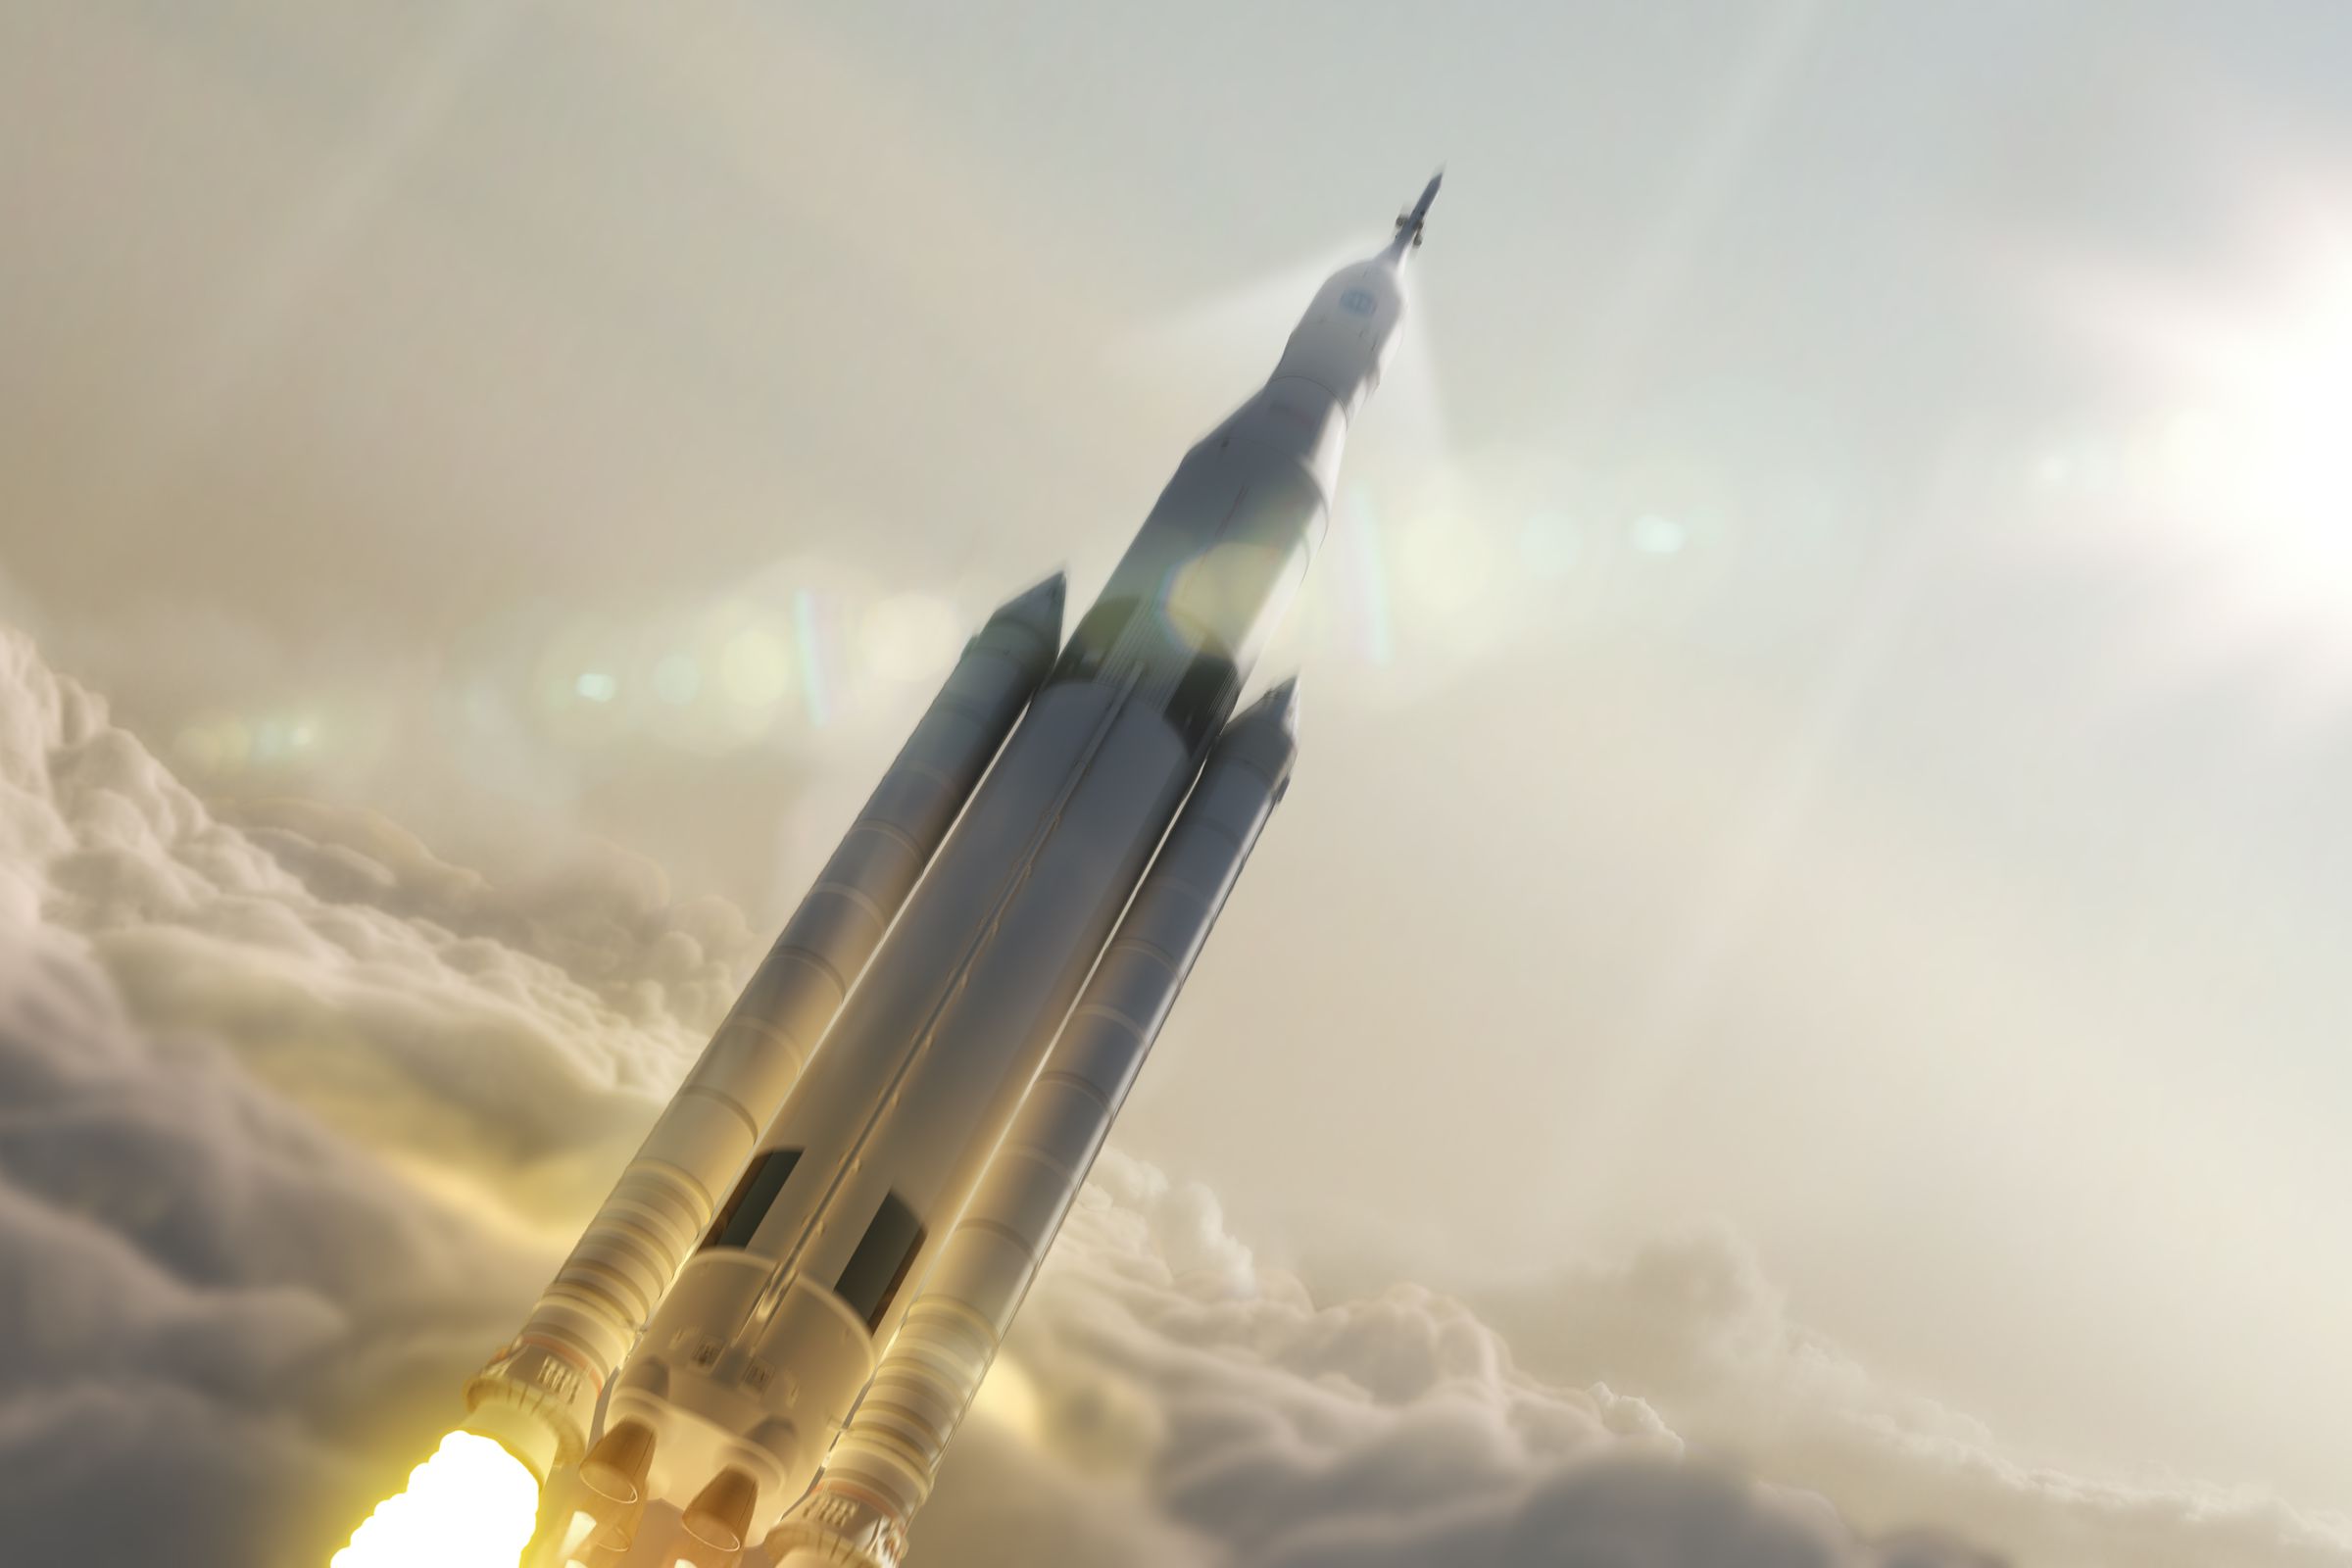 Artist's rendering of NASA's Space Launch System, a new rocket that will be the largest built at 380 feet tall